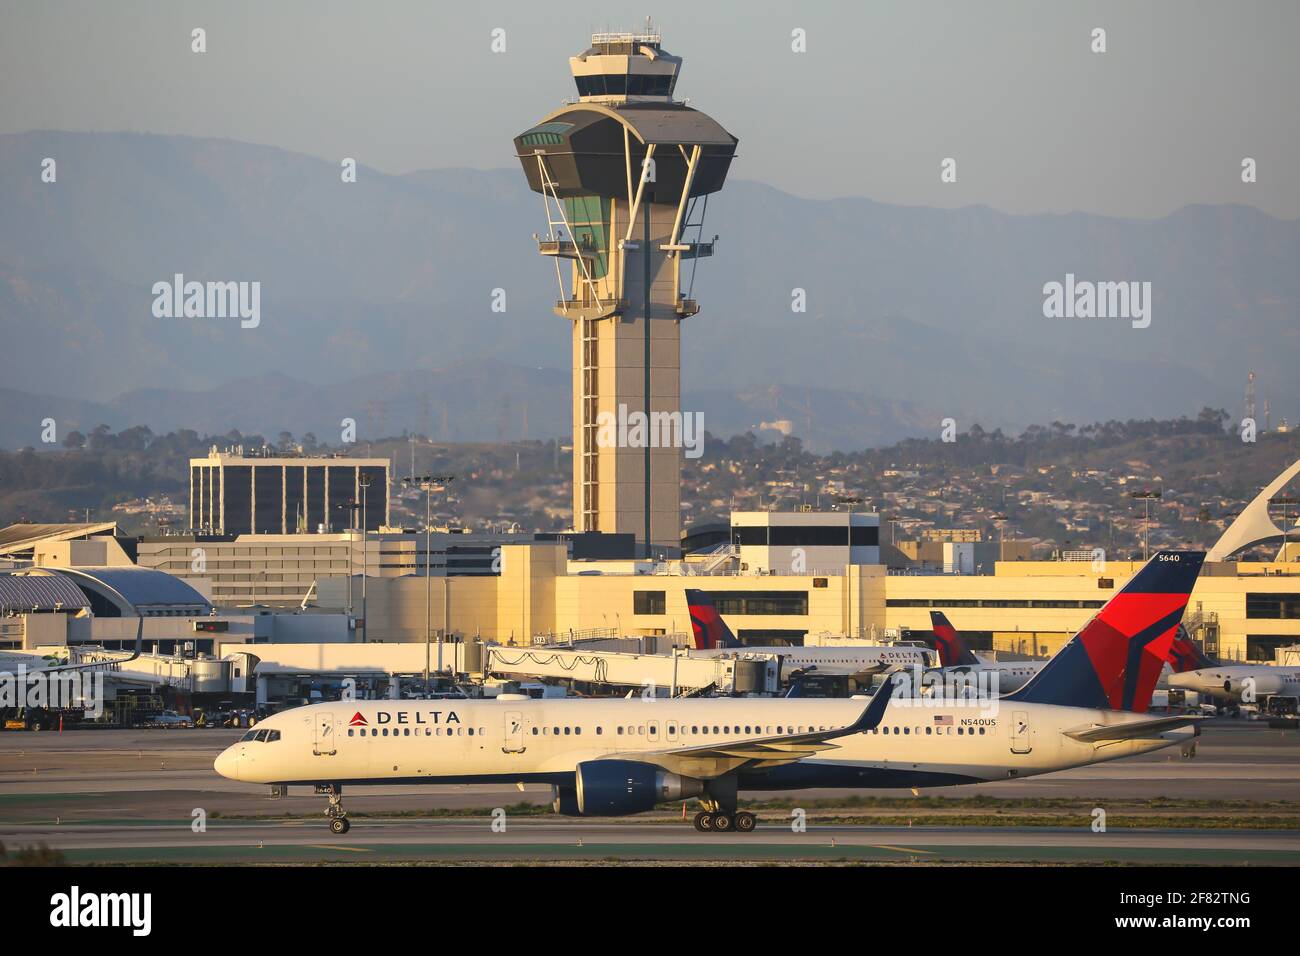 Los Angeles, USA – 20. February 2016: Delta Airlines Boeing 757-200 at Los Angeles airport (LAX) in the United States. Boeing is an aircraft manufactu Stock Photo